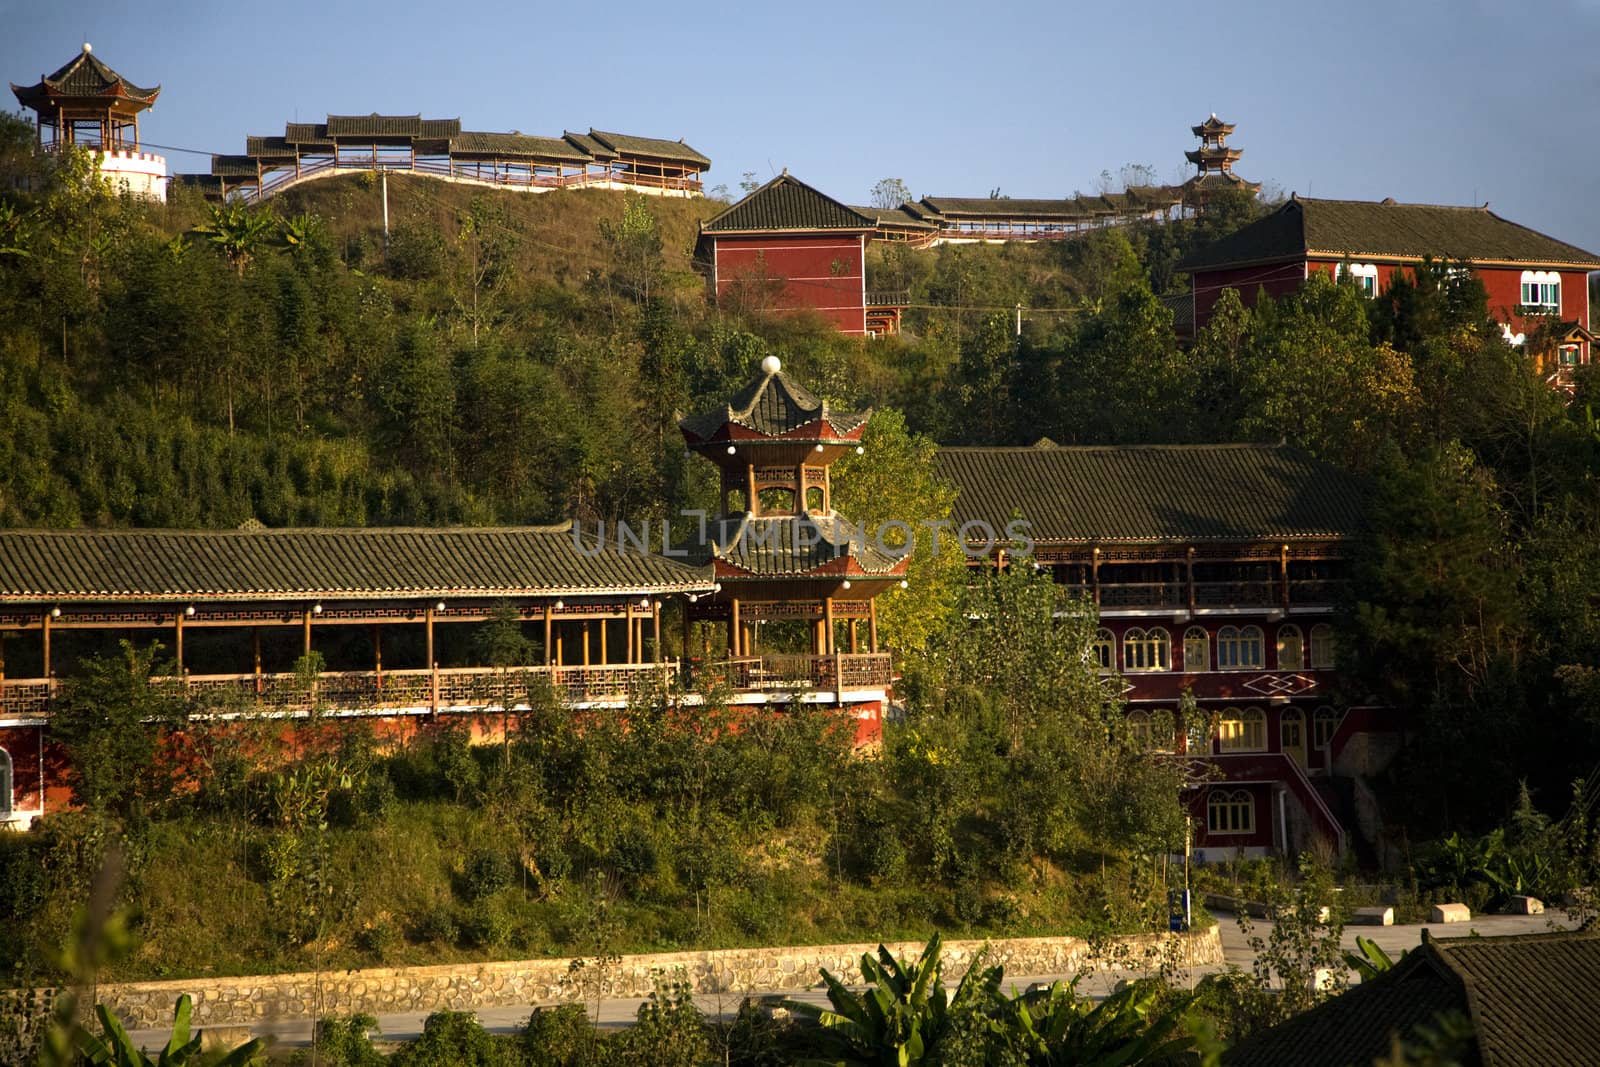 Old Chinese Restaurant Countryside Guizhou Province China by bill_perry